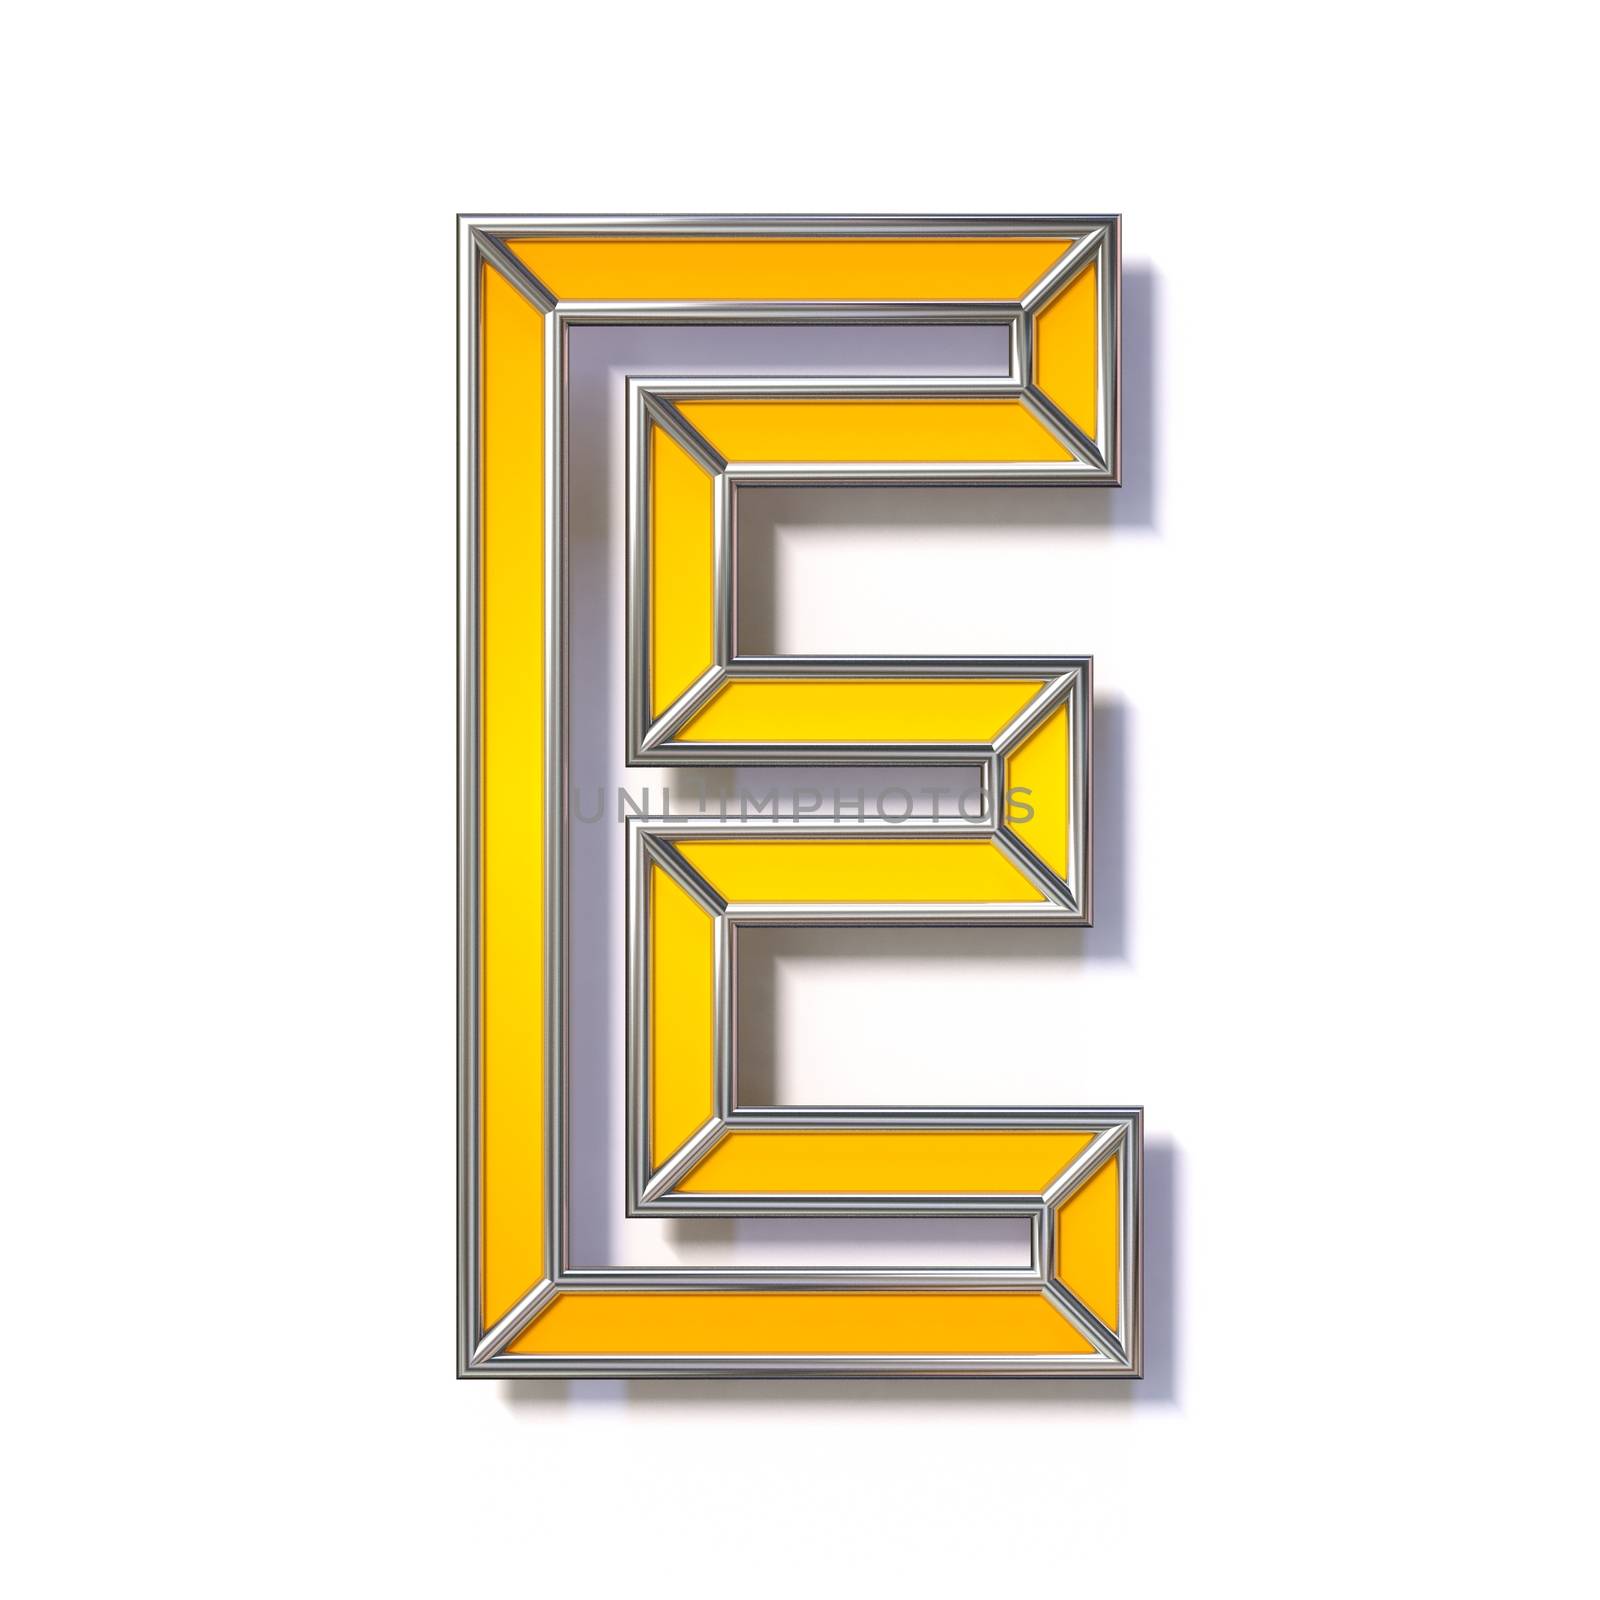 Orange metal wire font Letter E 3D rendering illustration isolated on white background